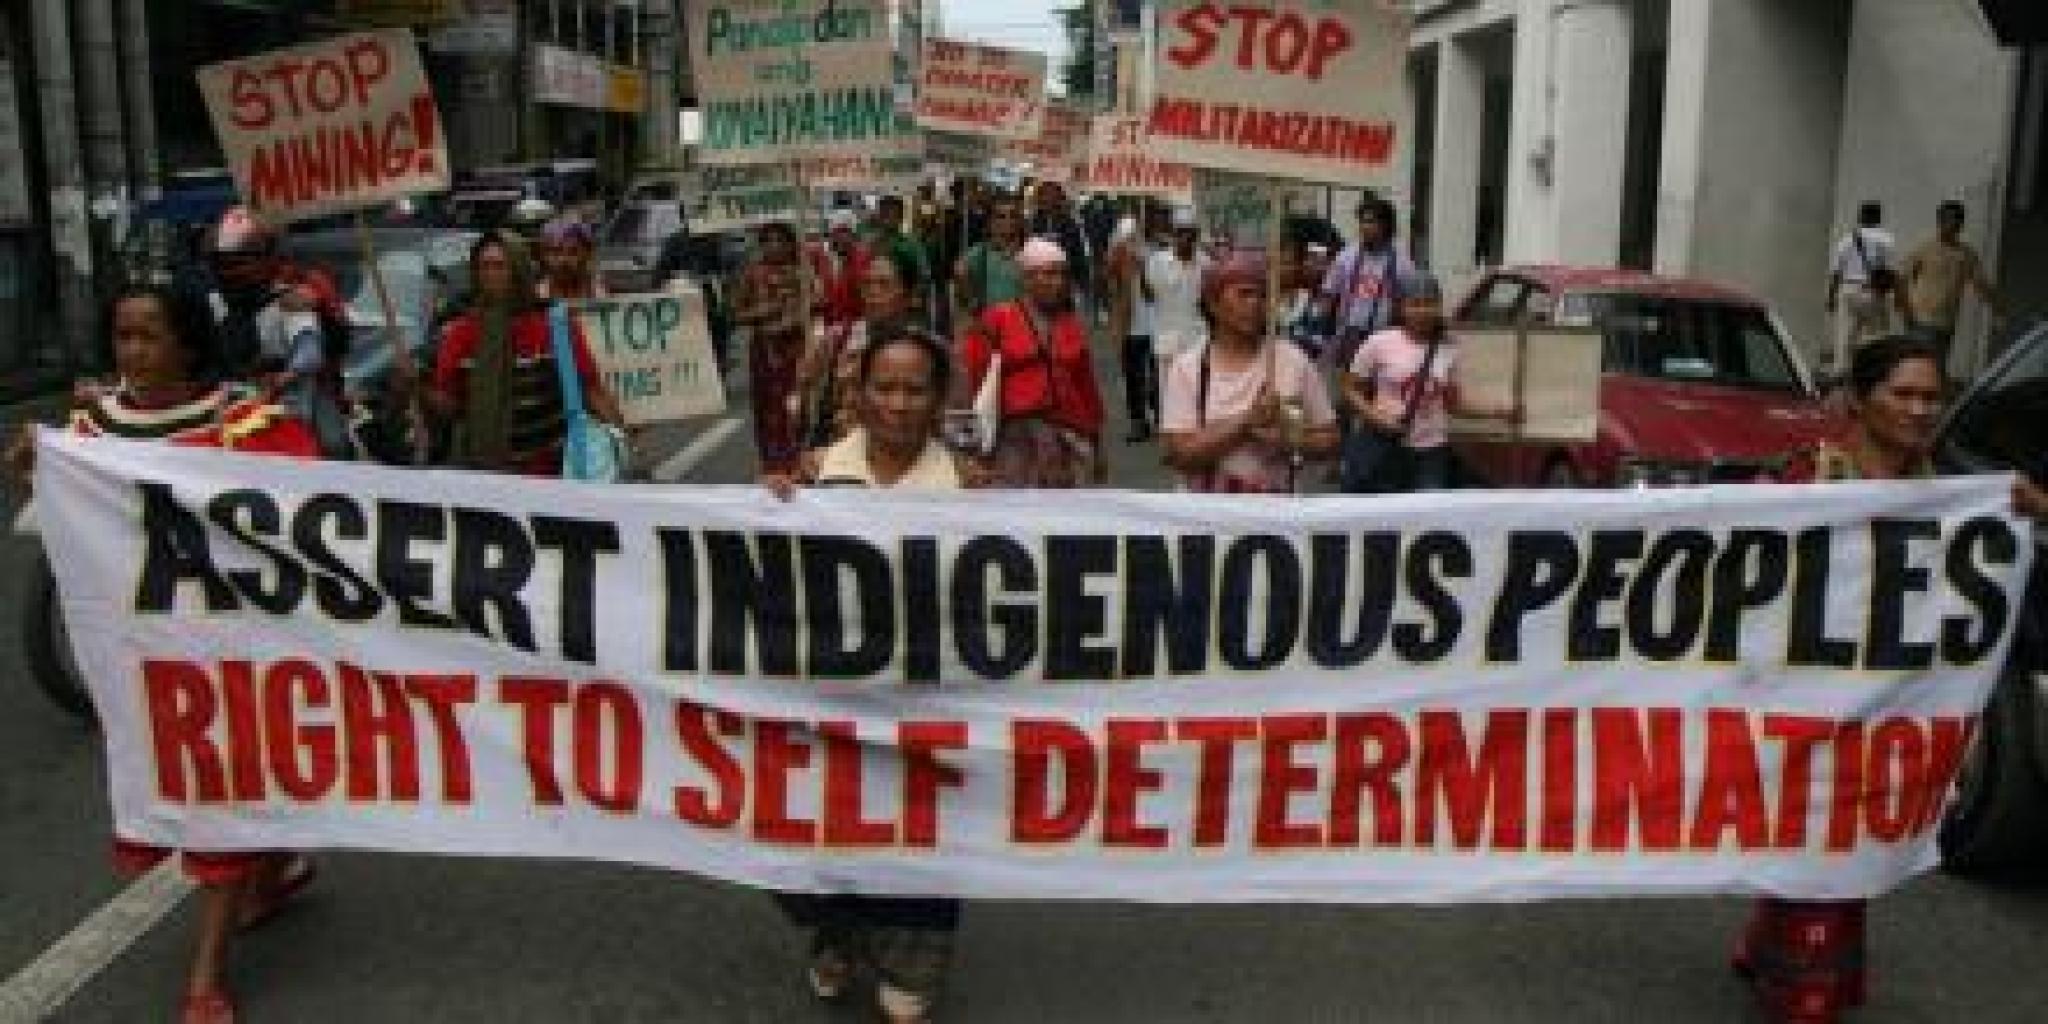 Image of Lumads marching with “Assert Indigenous Peoples right to self determination” banner in Davao City, Philippines by Keith Bacongo on flickr (https://flic.kr/p/59tNEG) (CC BY 2.0) 